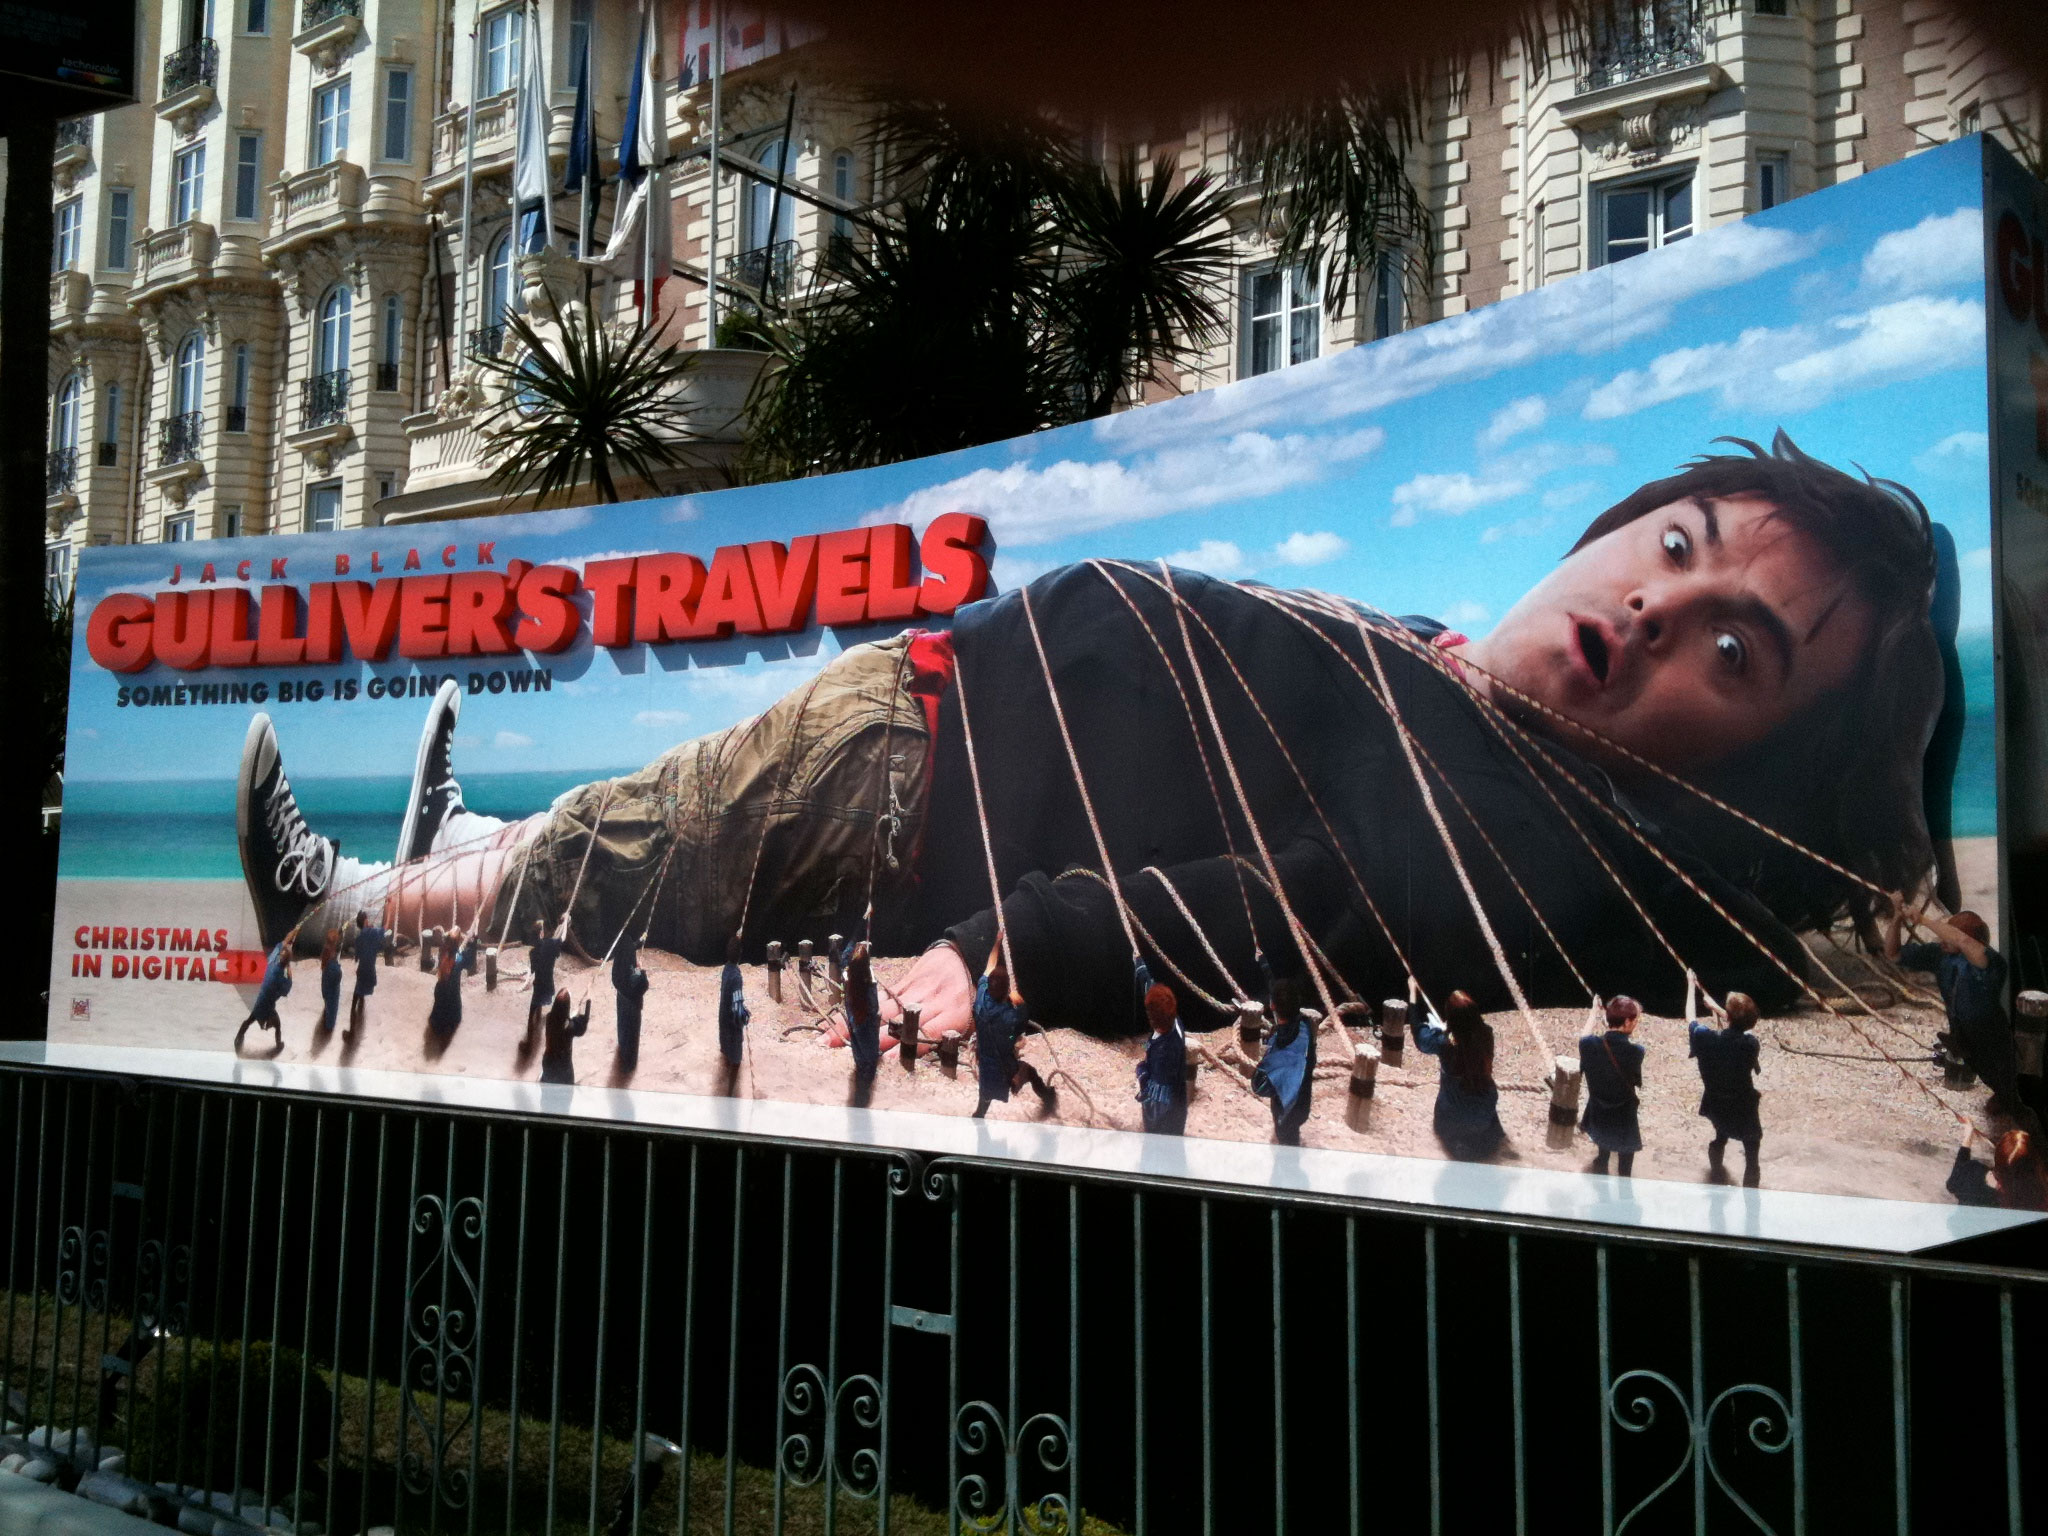  A giant poster display spotted by Empire while the Cannes Film Festival